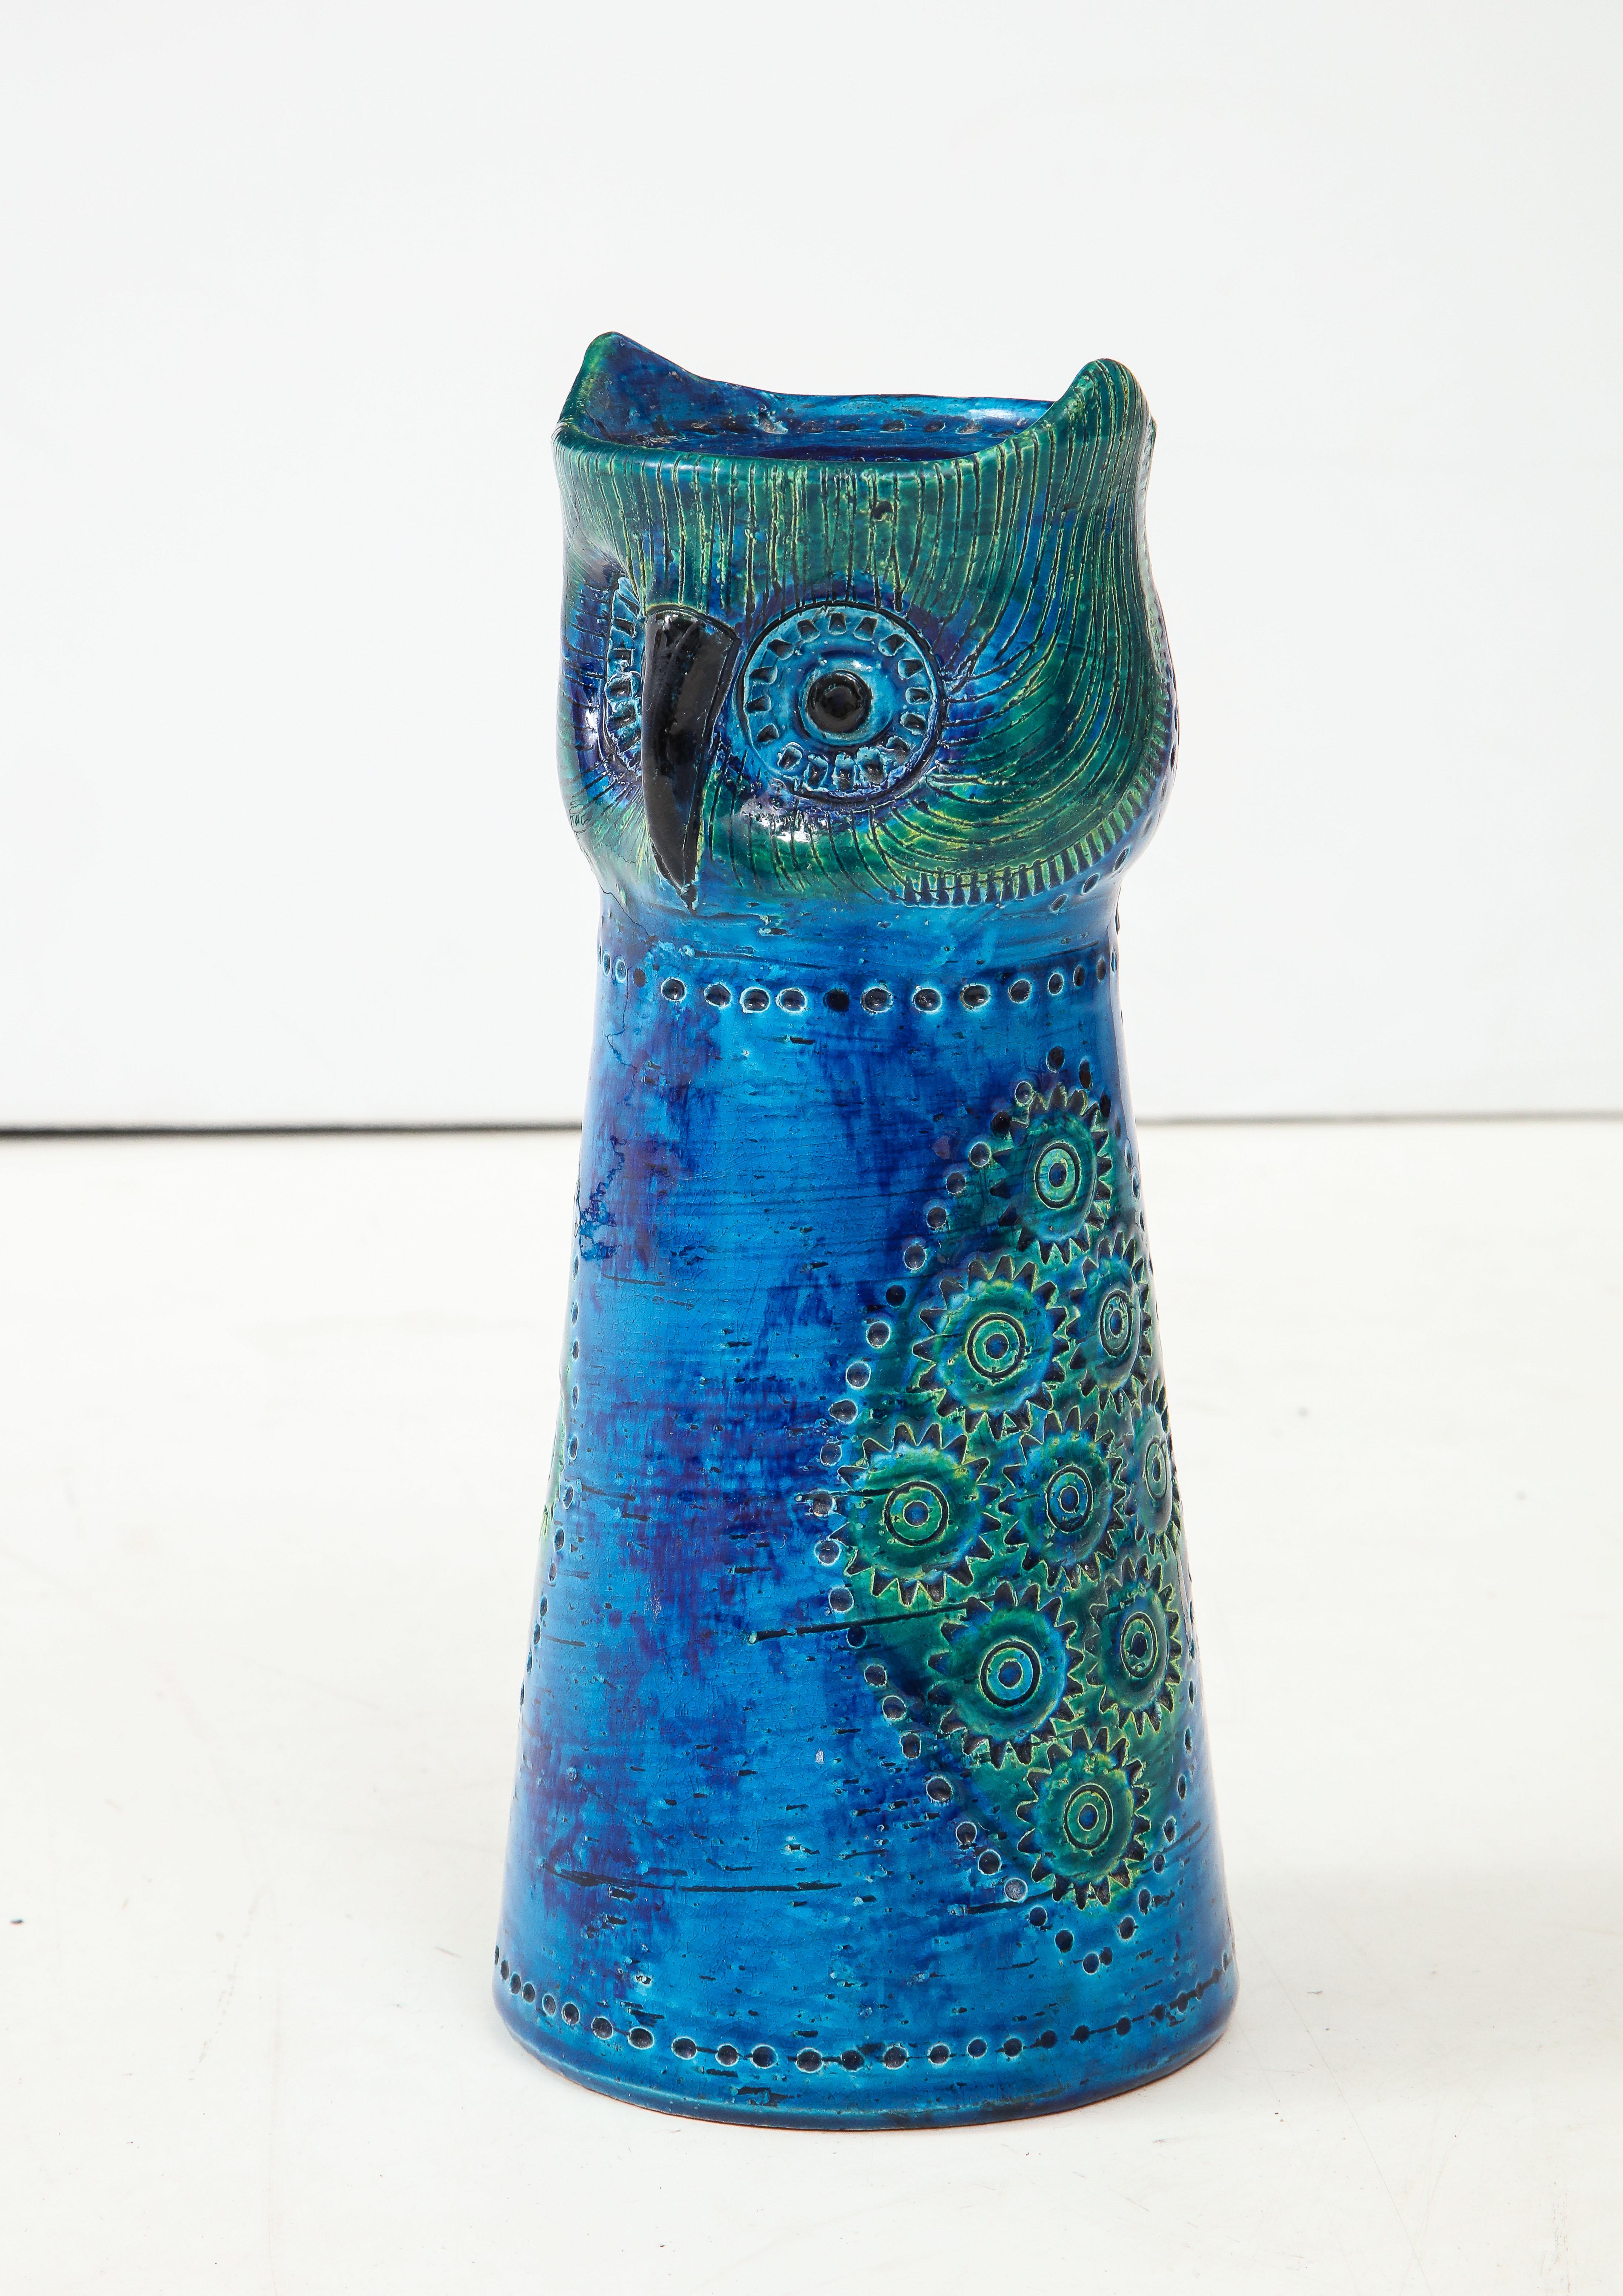 1960s Aldo Londi for Bitossi blue pottery owl distributed by Rosenthal Netter.